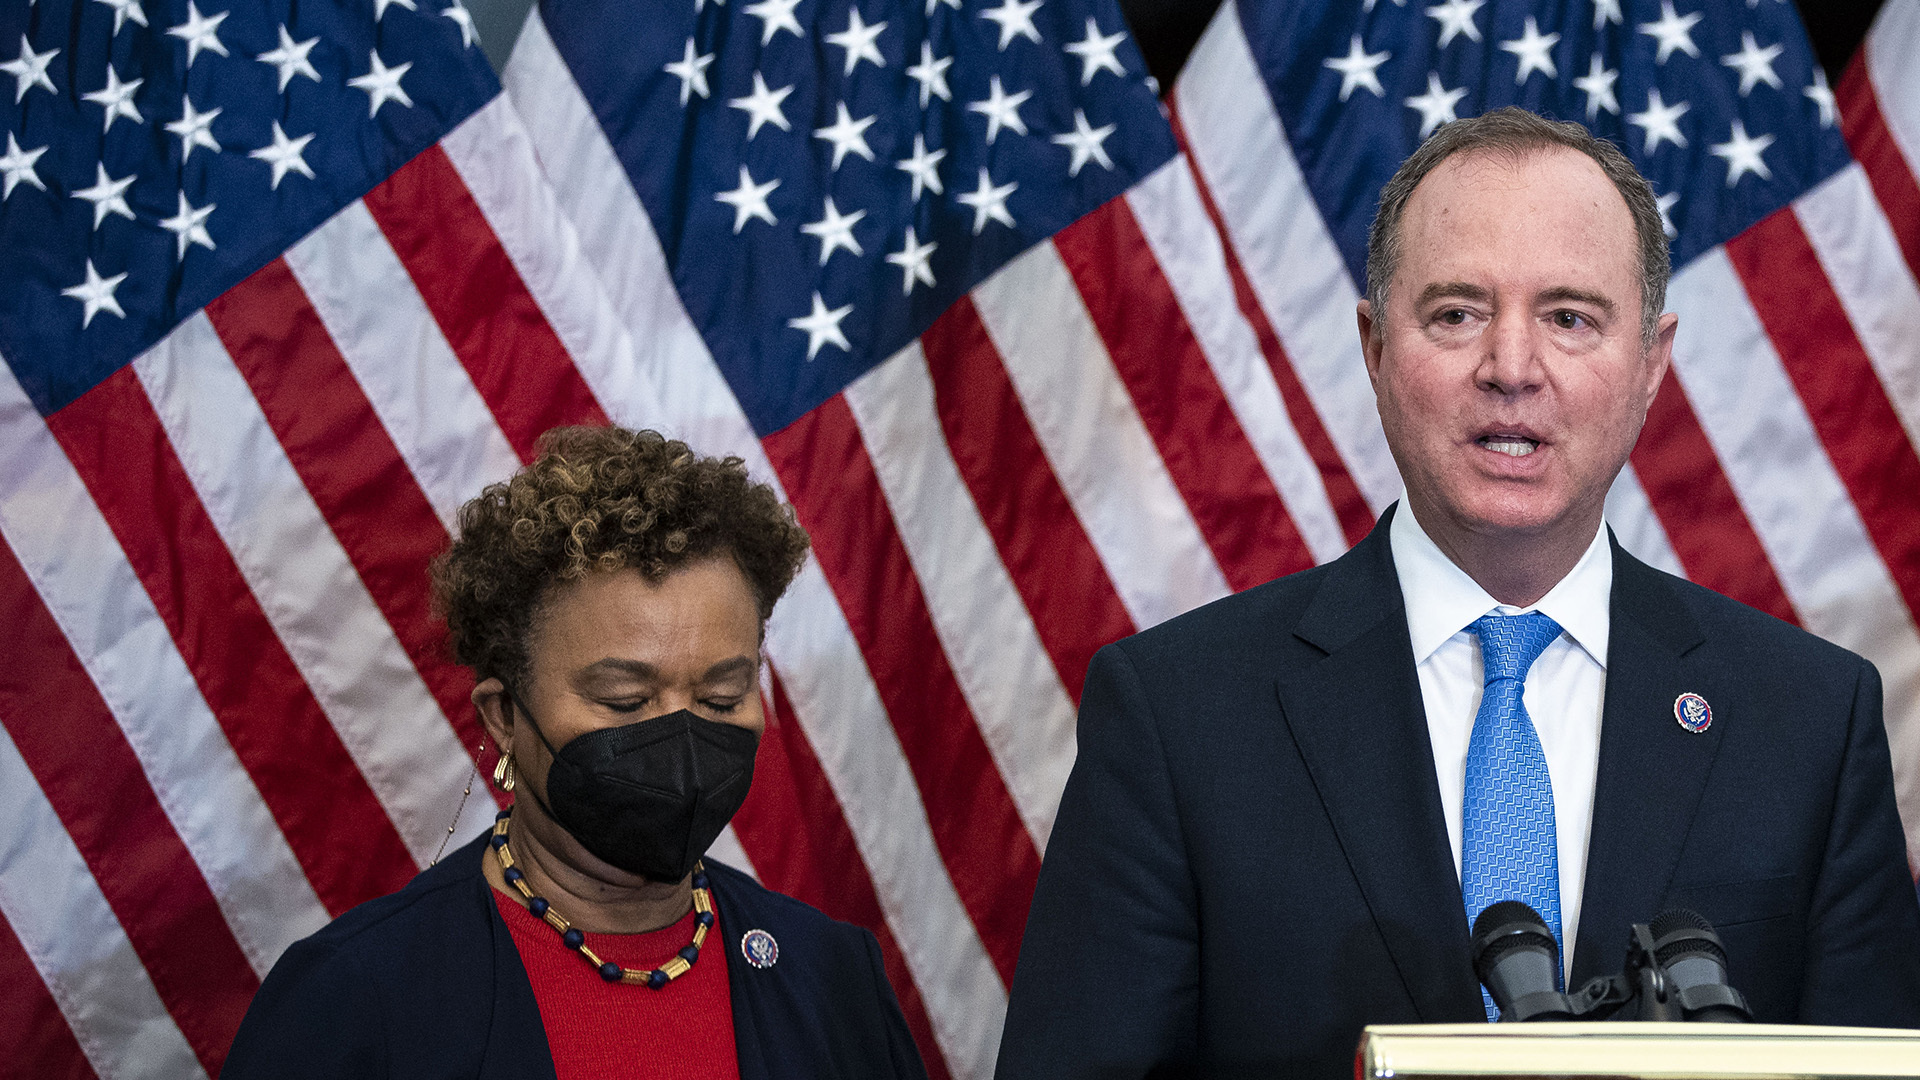 Schiff, a white man in a navy suit and light blue tie, speaks from a podium, while Lee, a Black woman in a black mask, black jacket and red shirt, stands next to him. Behind both is a large US flag.